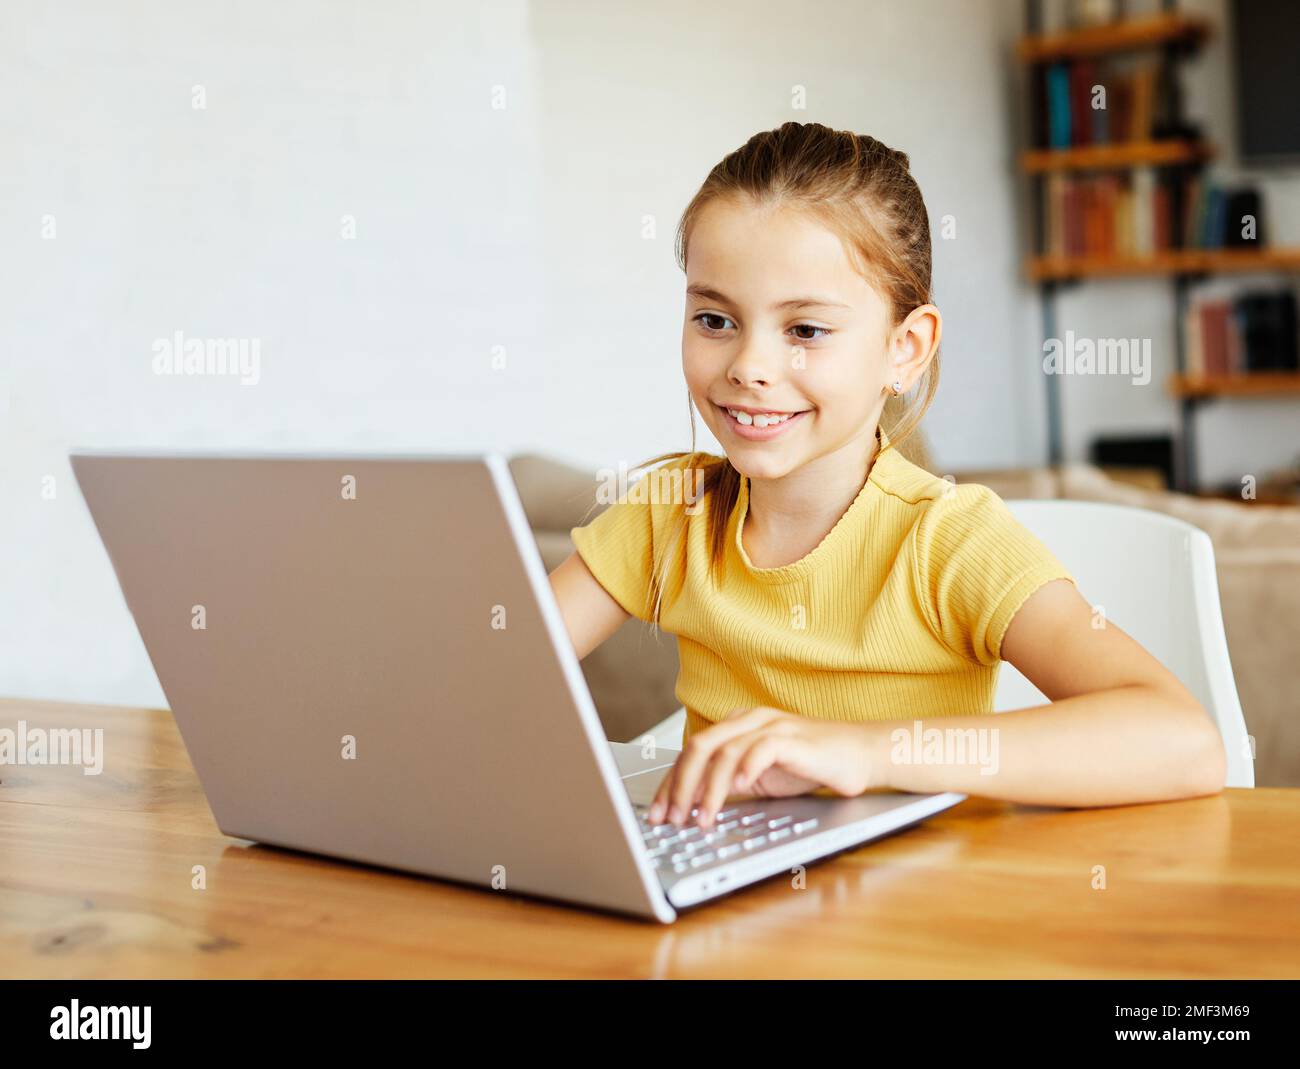 child laptop computer technology home girl education homework kid learning internet childhood student sitting connection using online Stock Photo